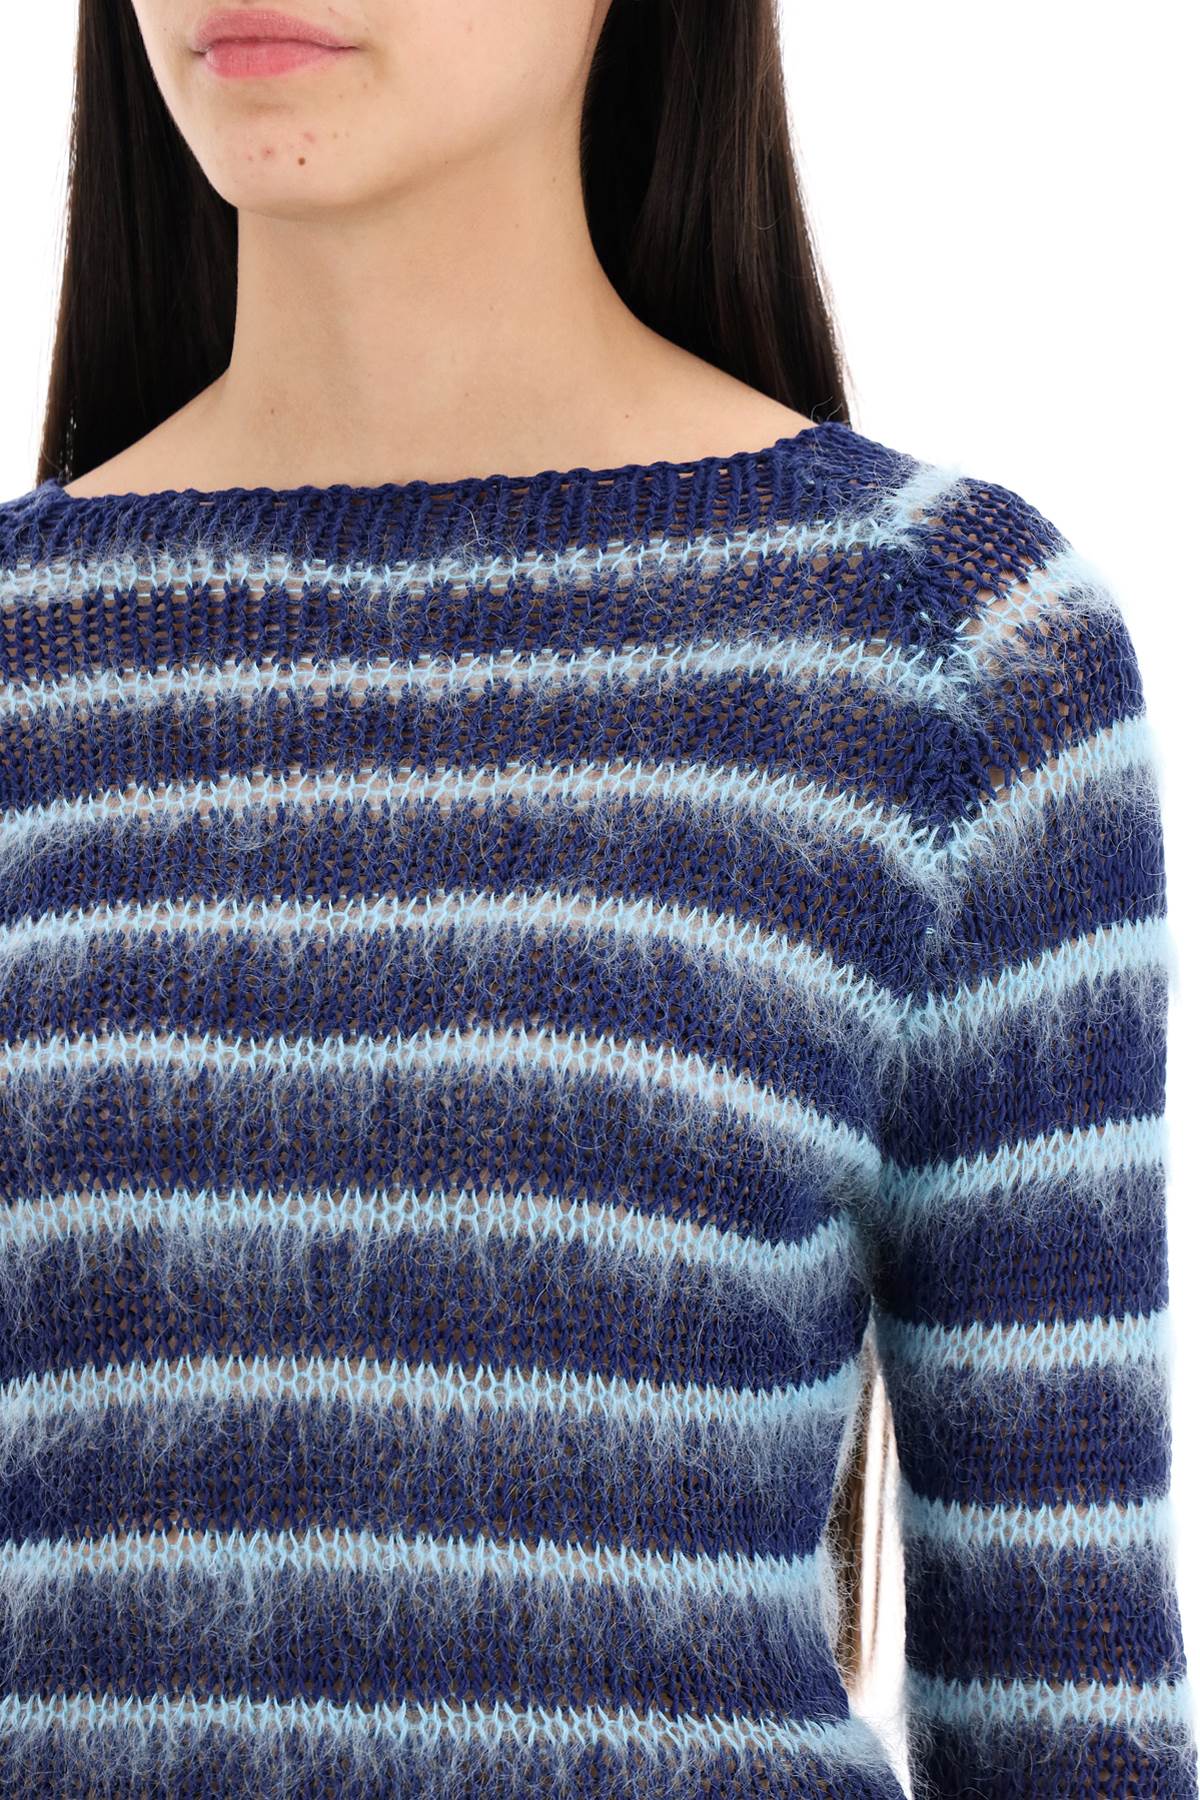 Marni striped cotton and mohair pullover-women > clothing > knitwear-Marni-40-Mixed colours-Urbanheer